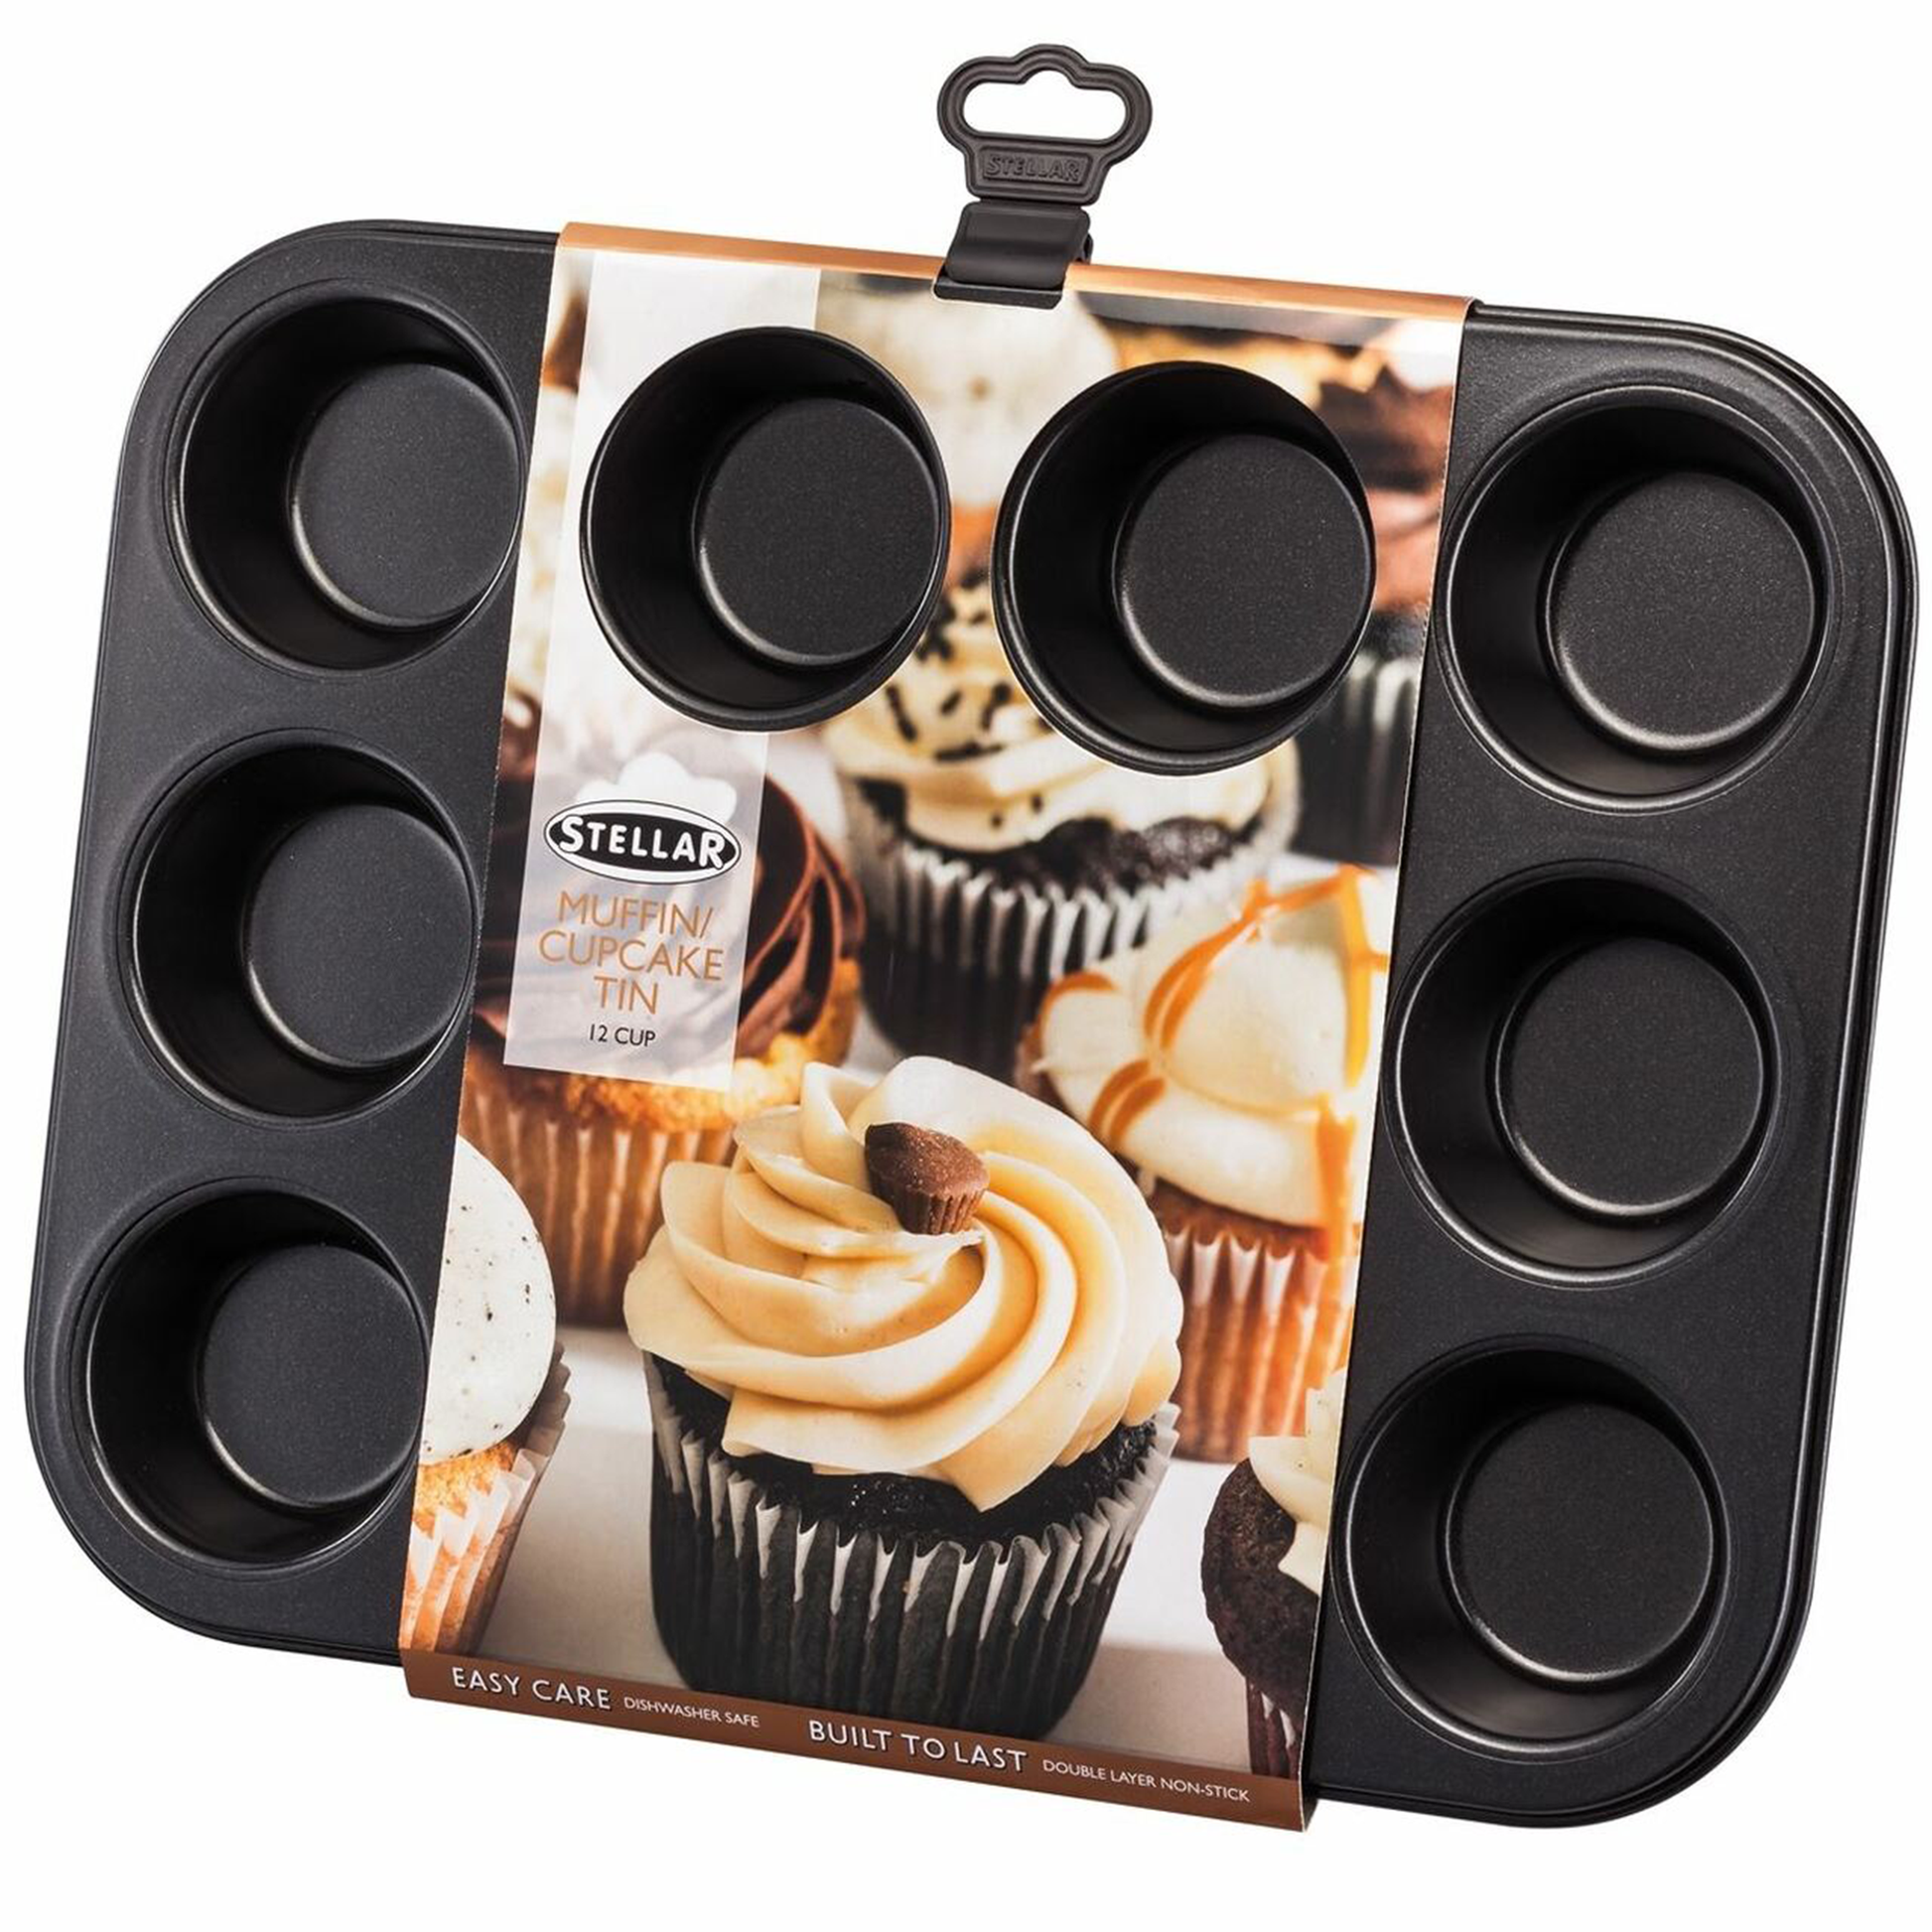 the cup cake/muffin tin in it's packaging 